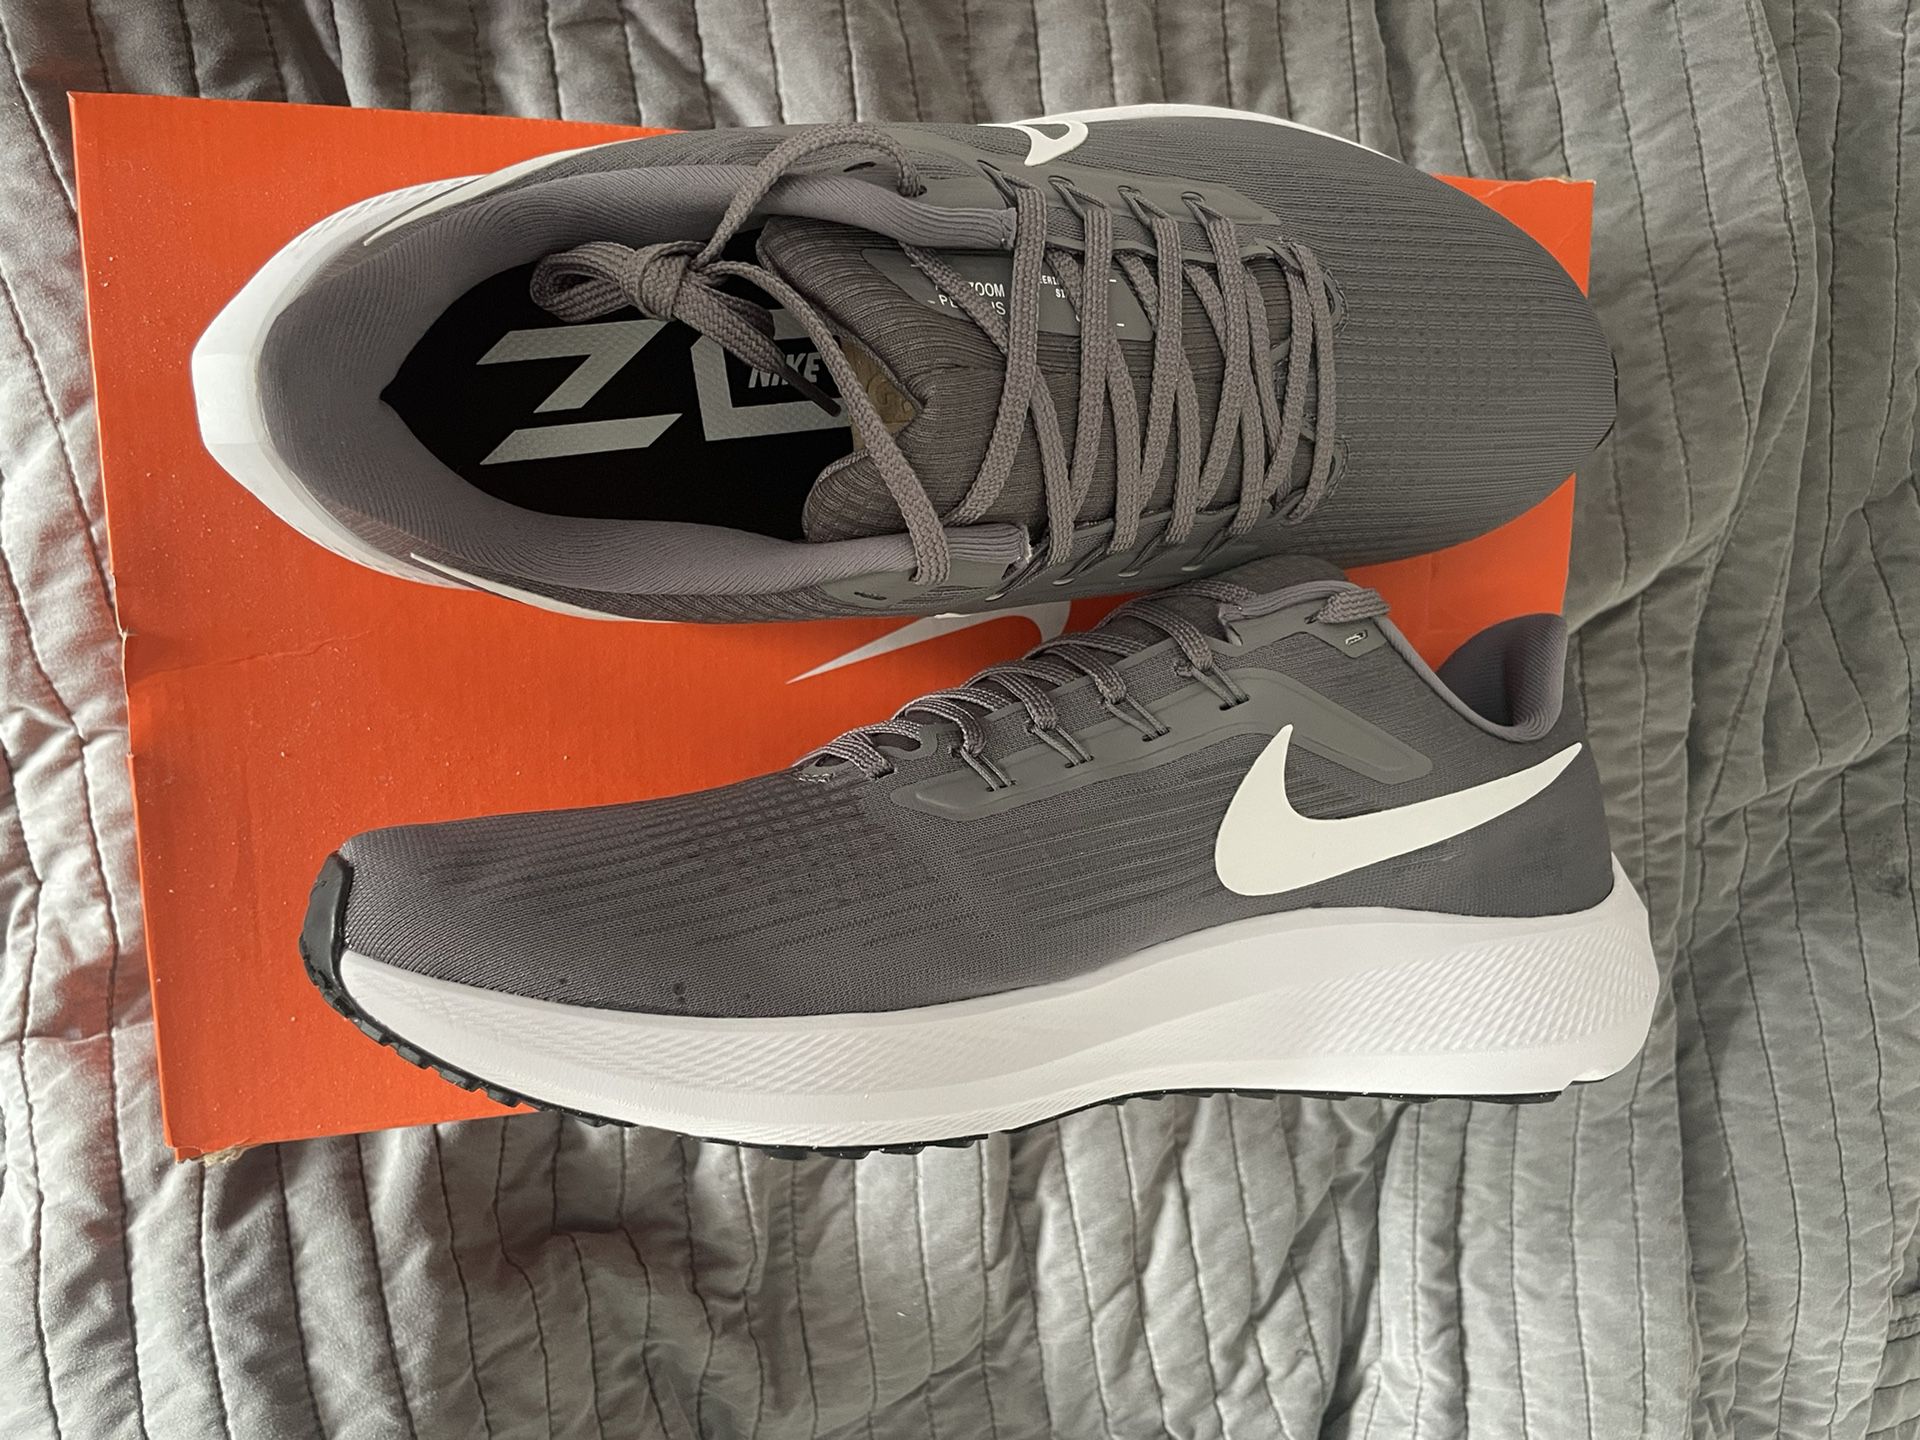 akse arbejder Stige Nike Zoom Air Pegasus Size 13 for Sale in Garden City South, NY - OfferUp